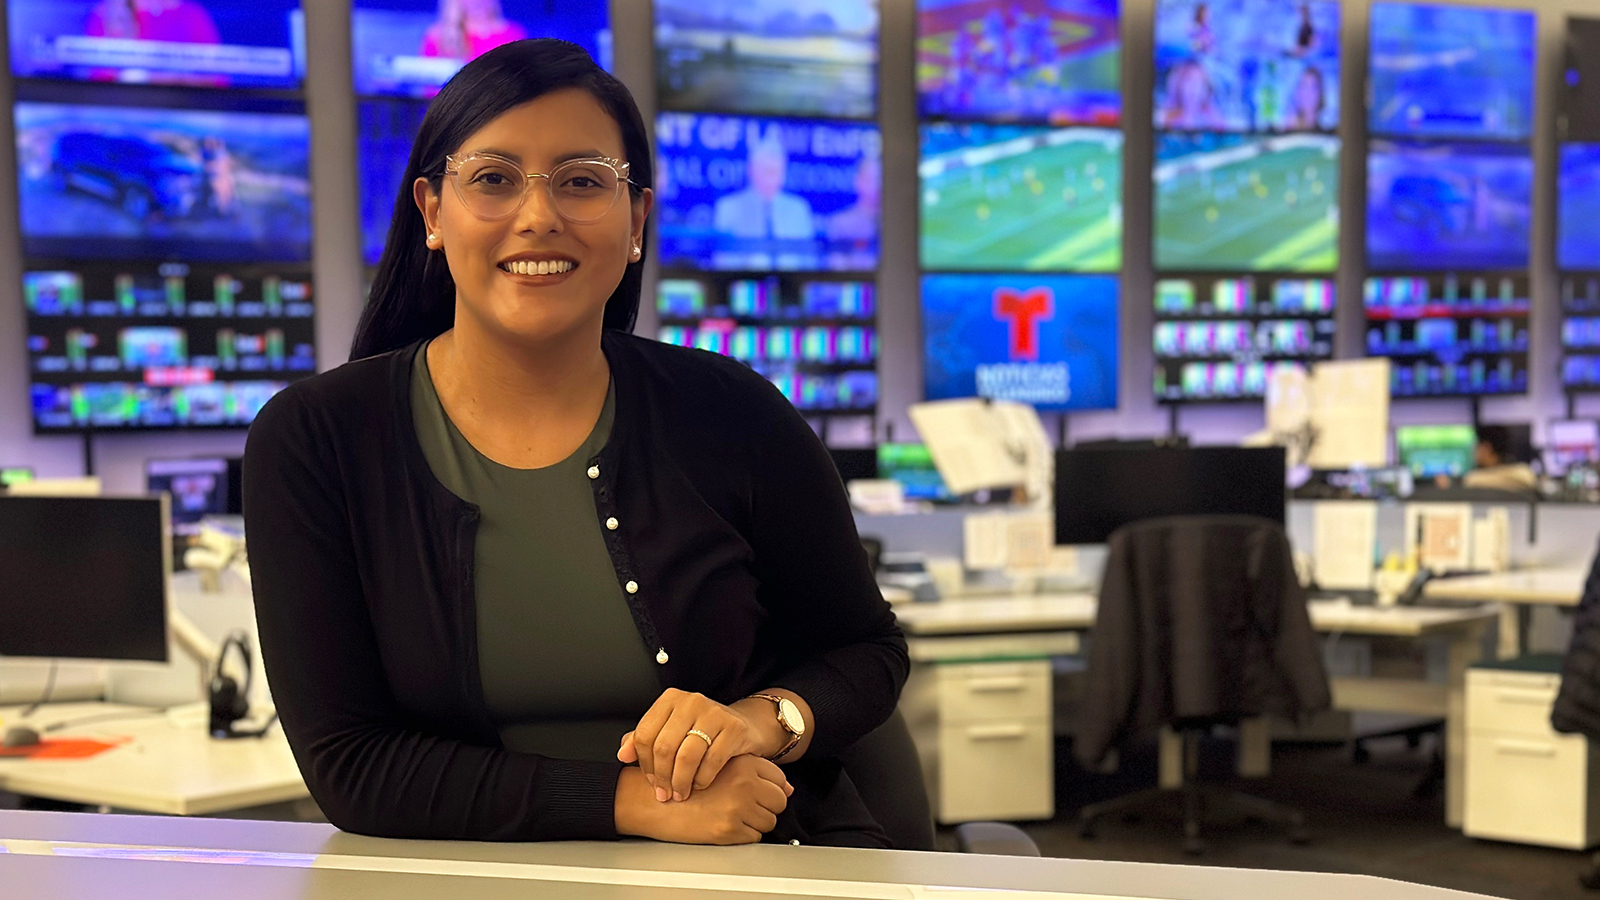 Priscilla sits at a desk in a live news television studio. She is wearing glasses and is smiling.